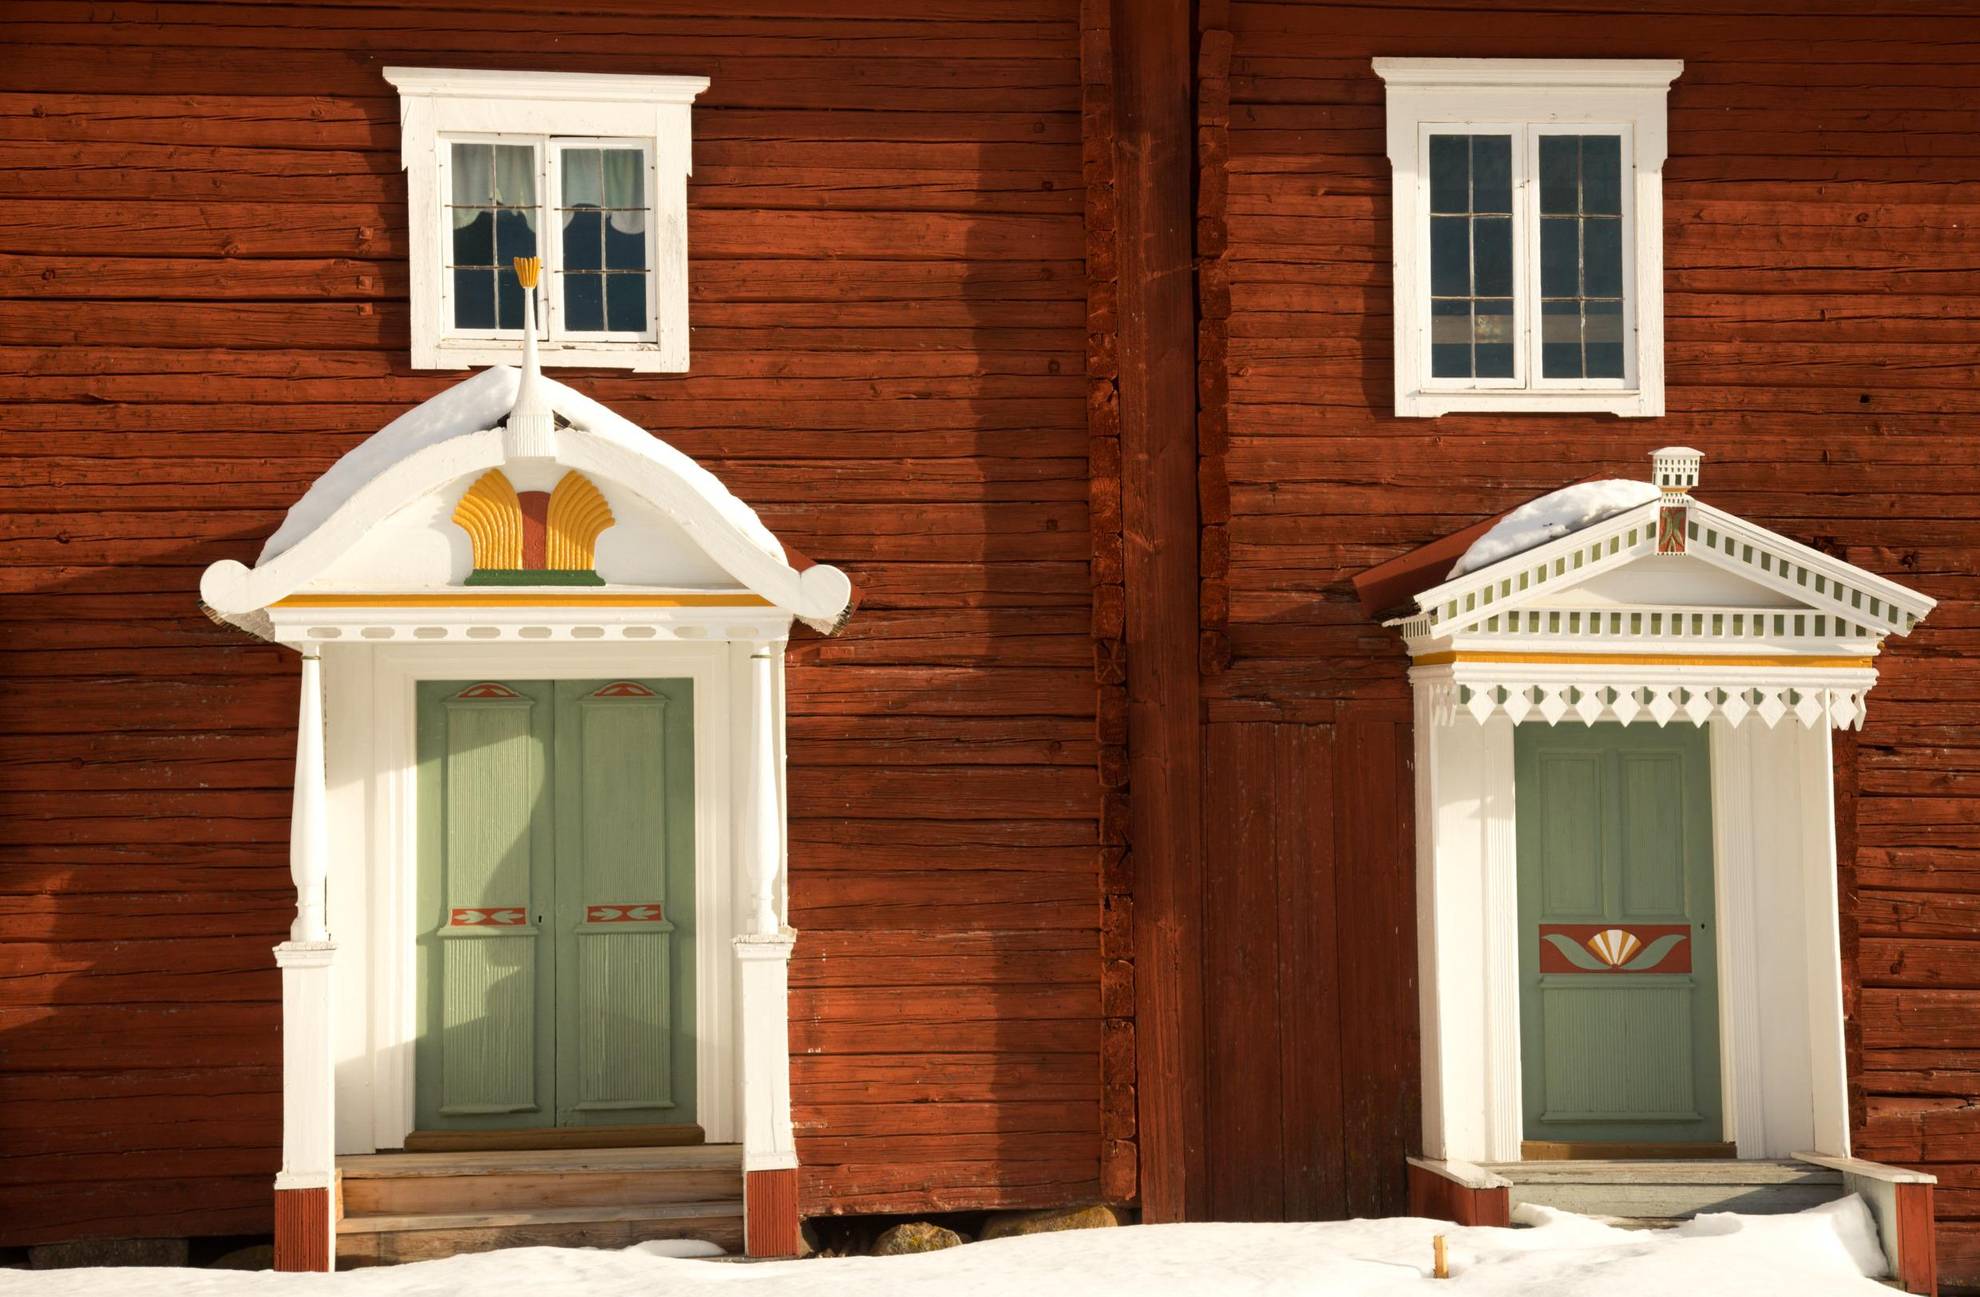 A close-up of a traditional farm house in Hälsingland province with wooden ornaments decorating the entrances.